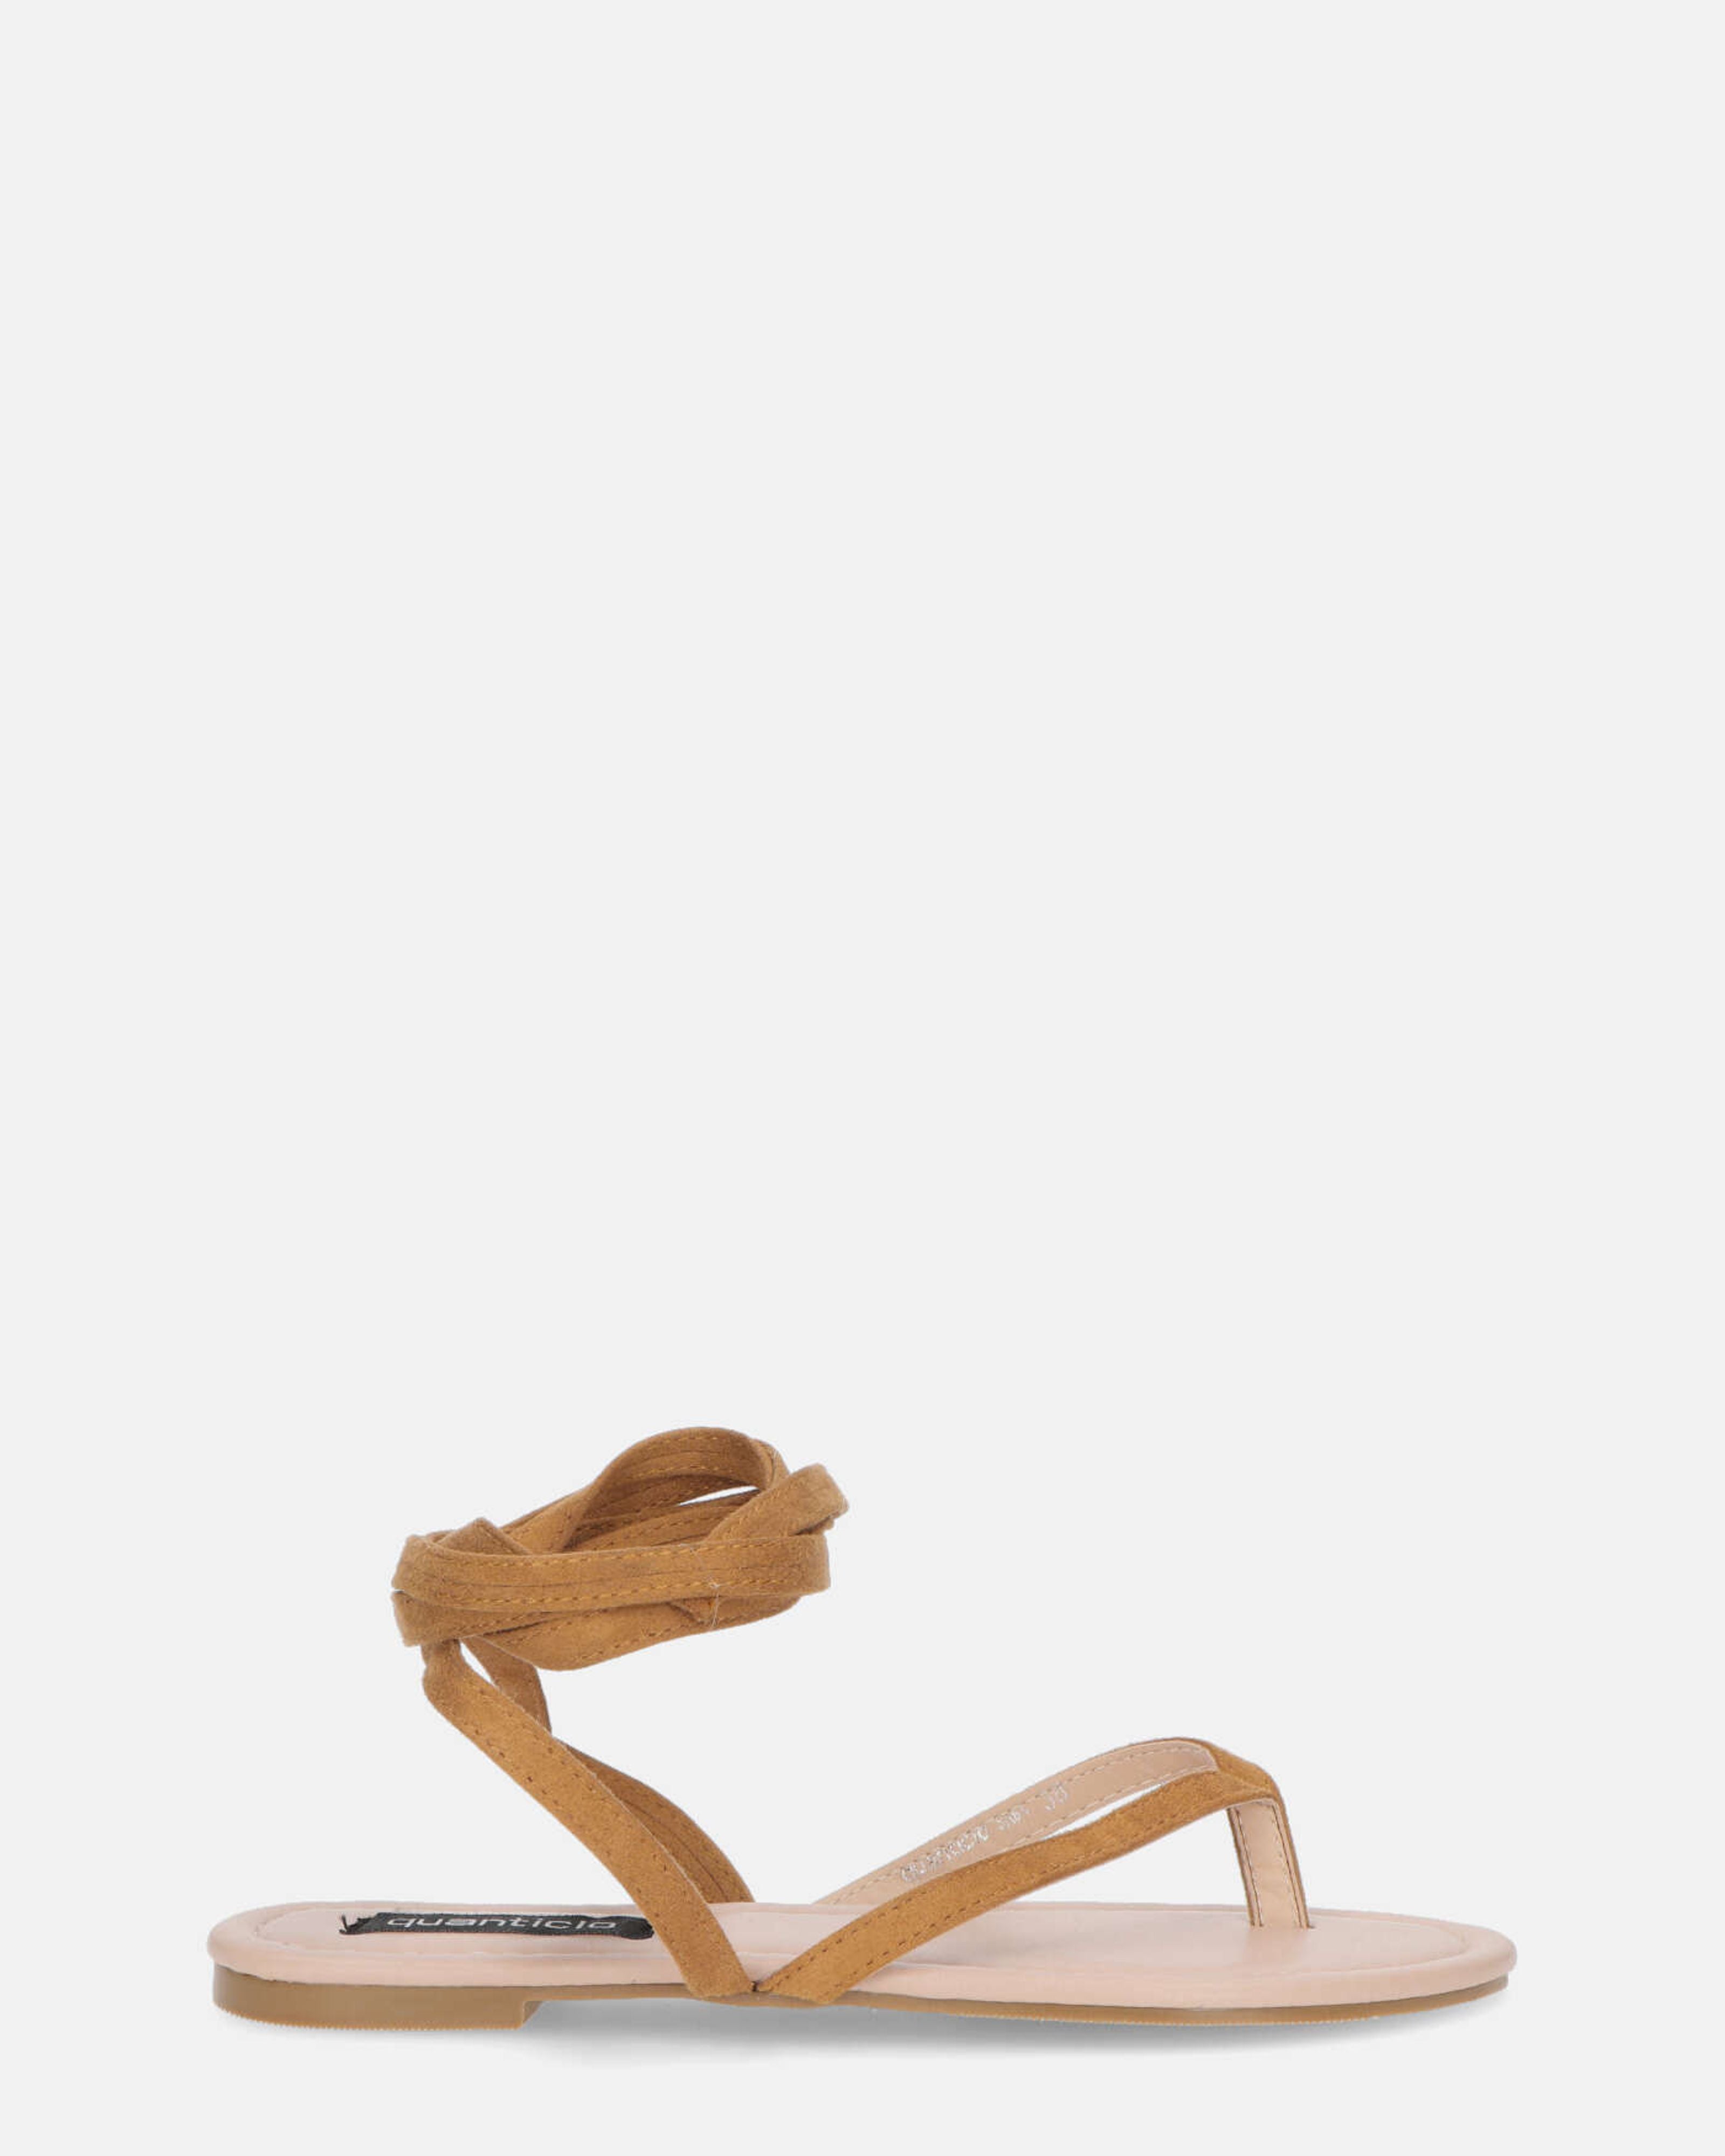 SABA - lace up flat sandals in nude